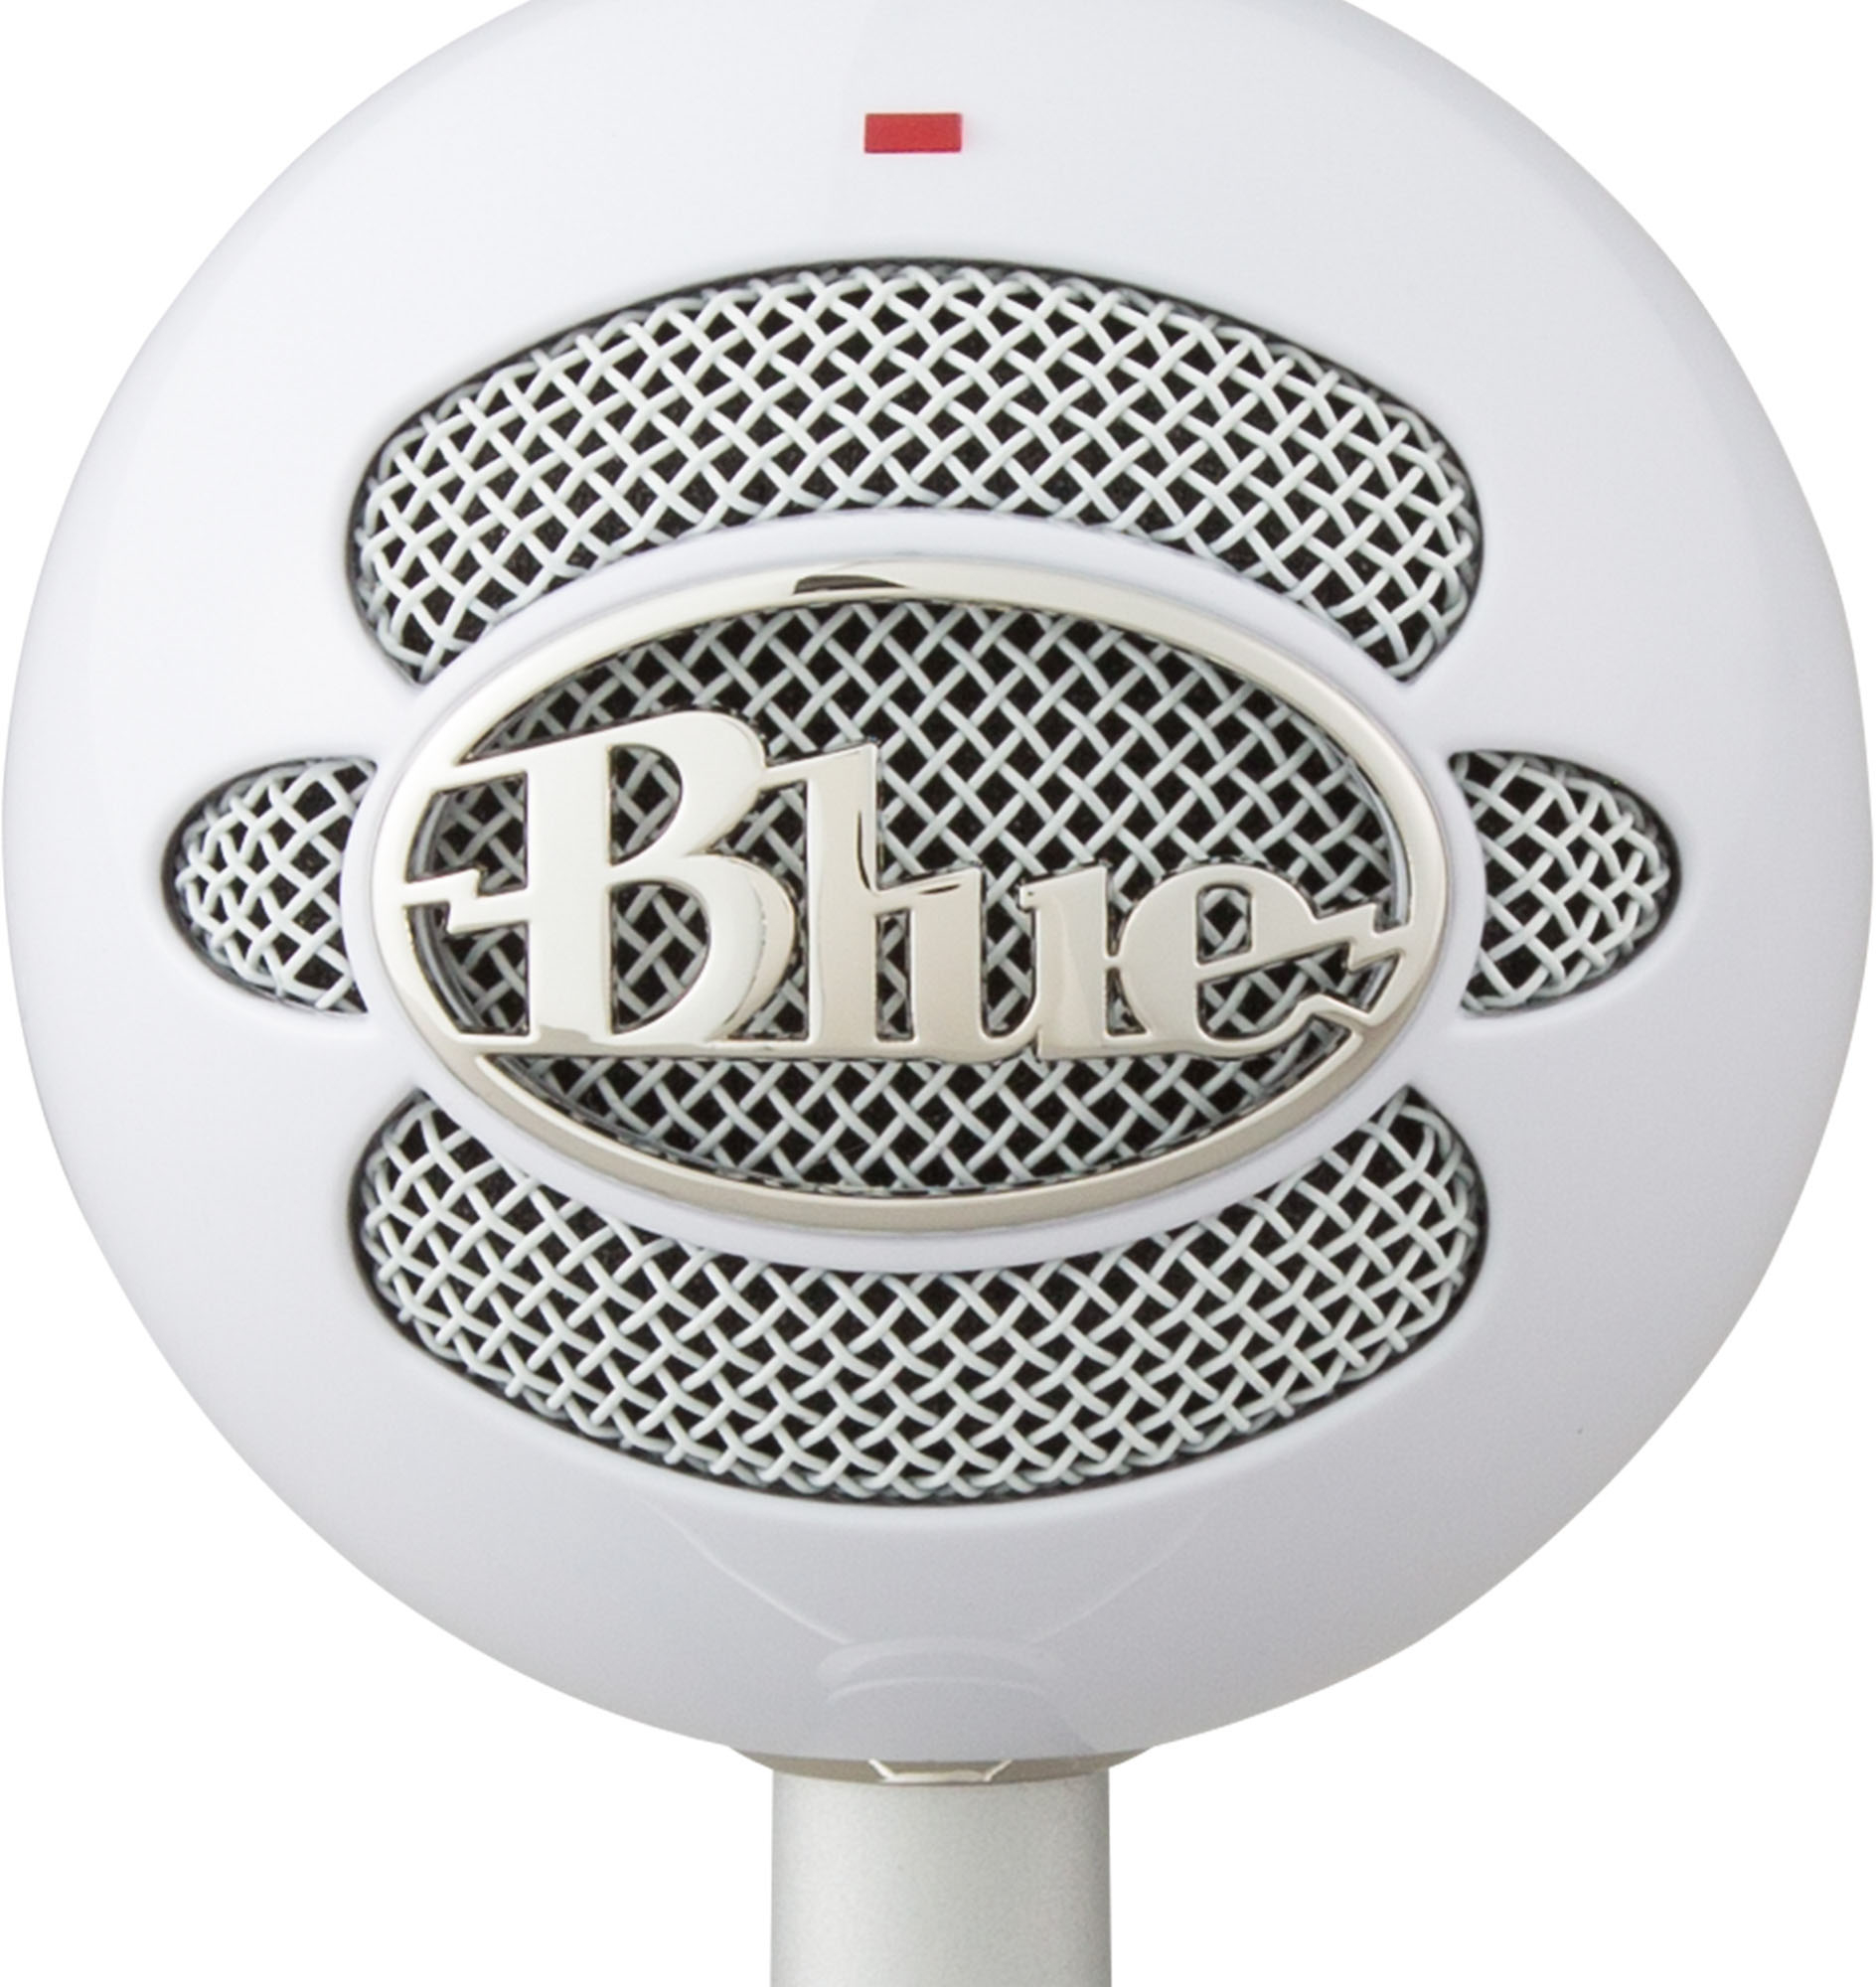 Blue Microphones Snowball iCE Wired Cardioid Plug Play Microphone 988-000070 - Best